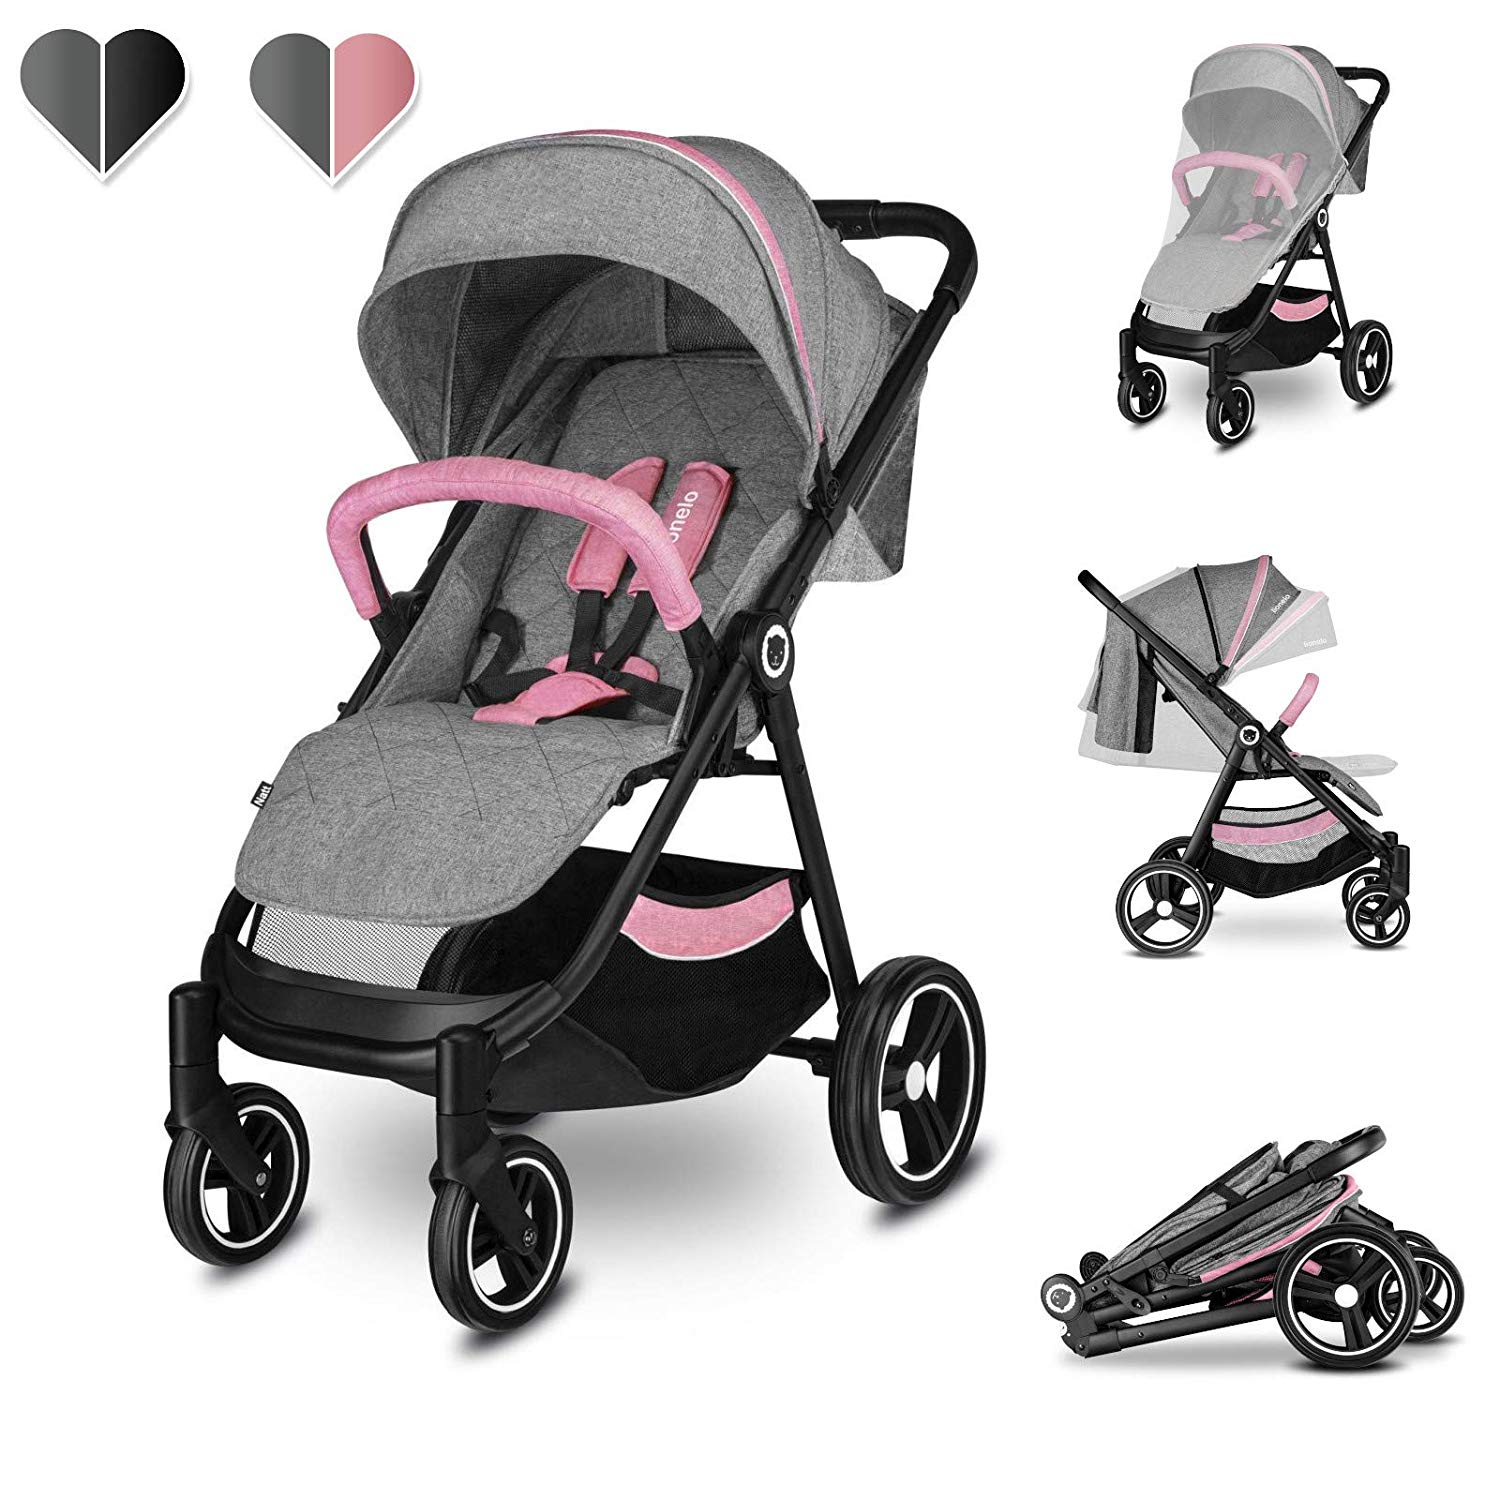 Lionelo Natt Pushchair Buggy up to 22 kg, Buggy with Reclining Position, Footrest Adjustment, XXL Canopy with Viewing Window, EVA Wheels, Mosquito Net, Foldable pink